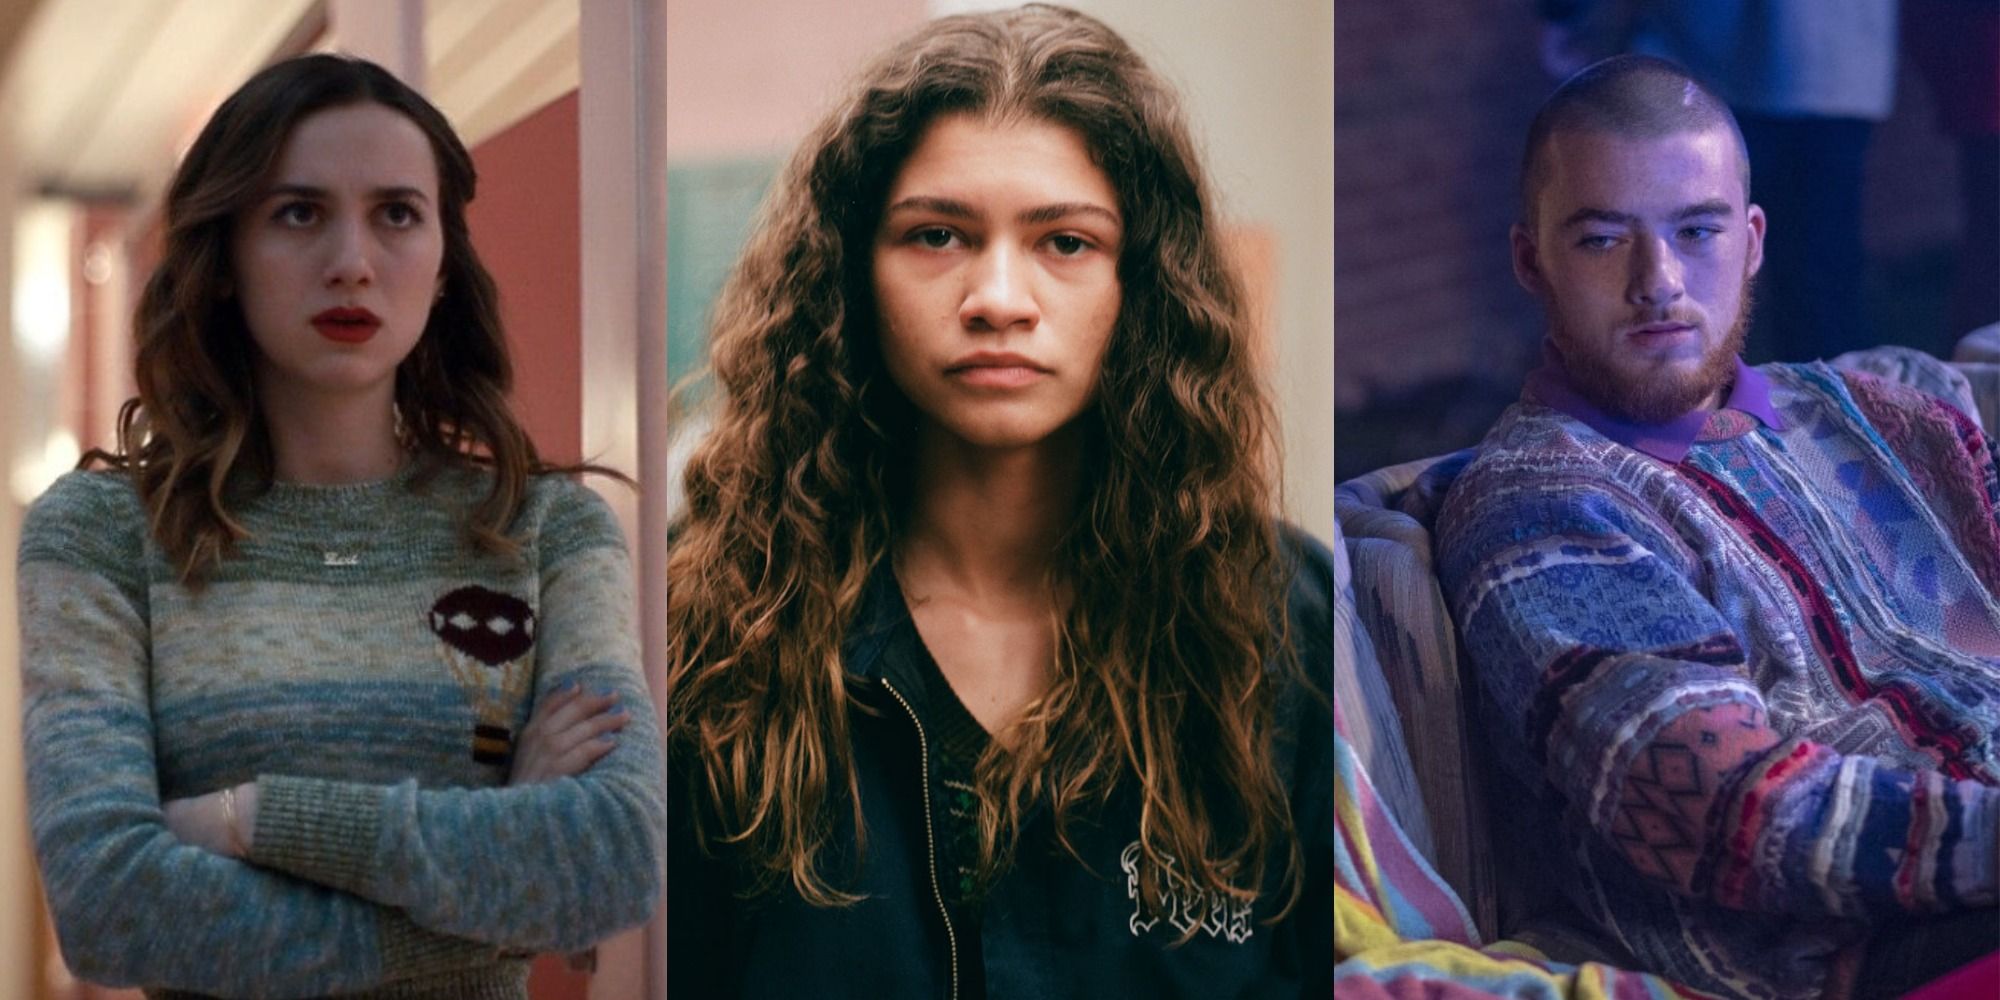 Split image of Lexi, Rue and Fezco from Euphoria